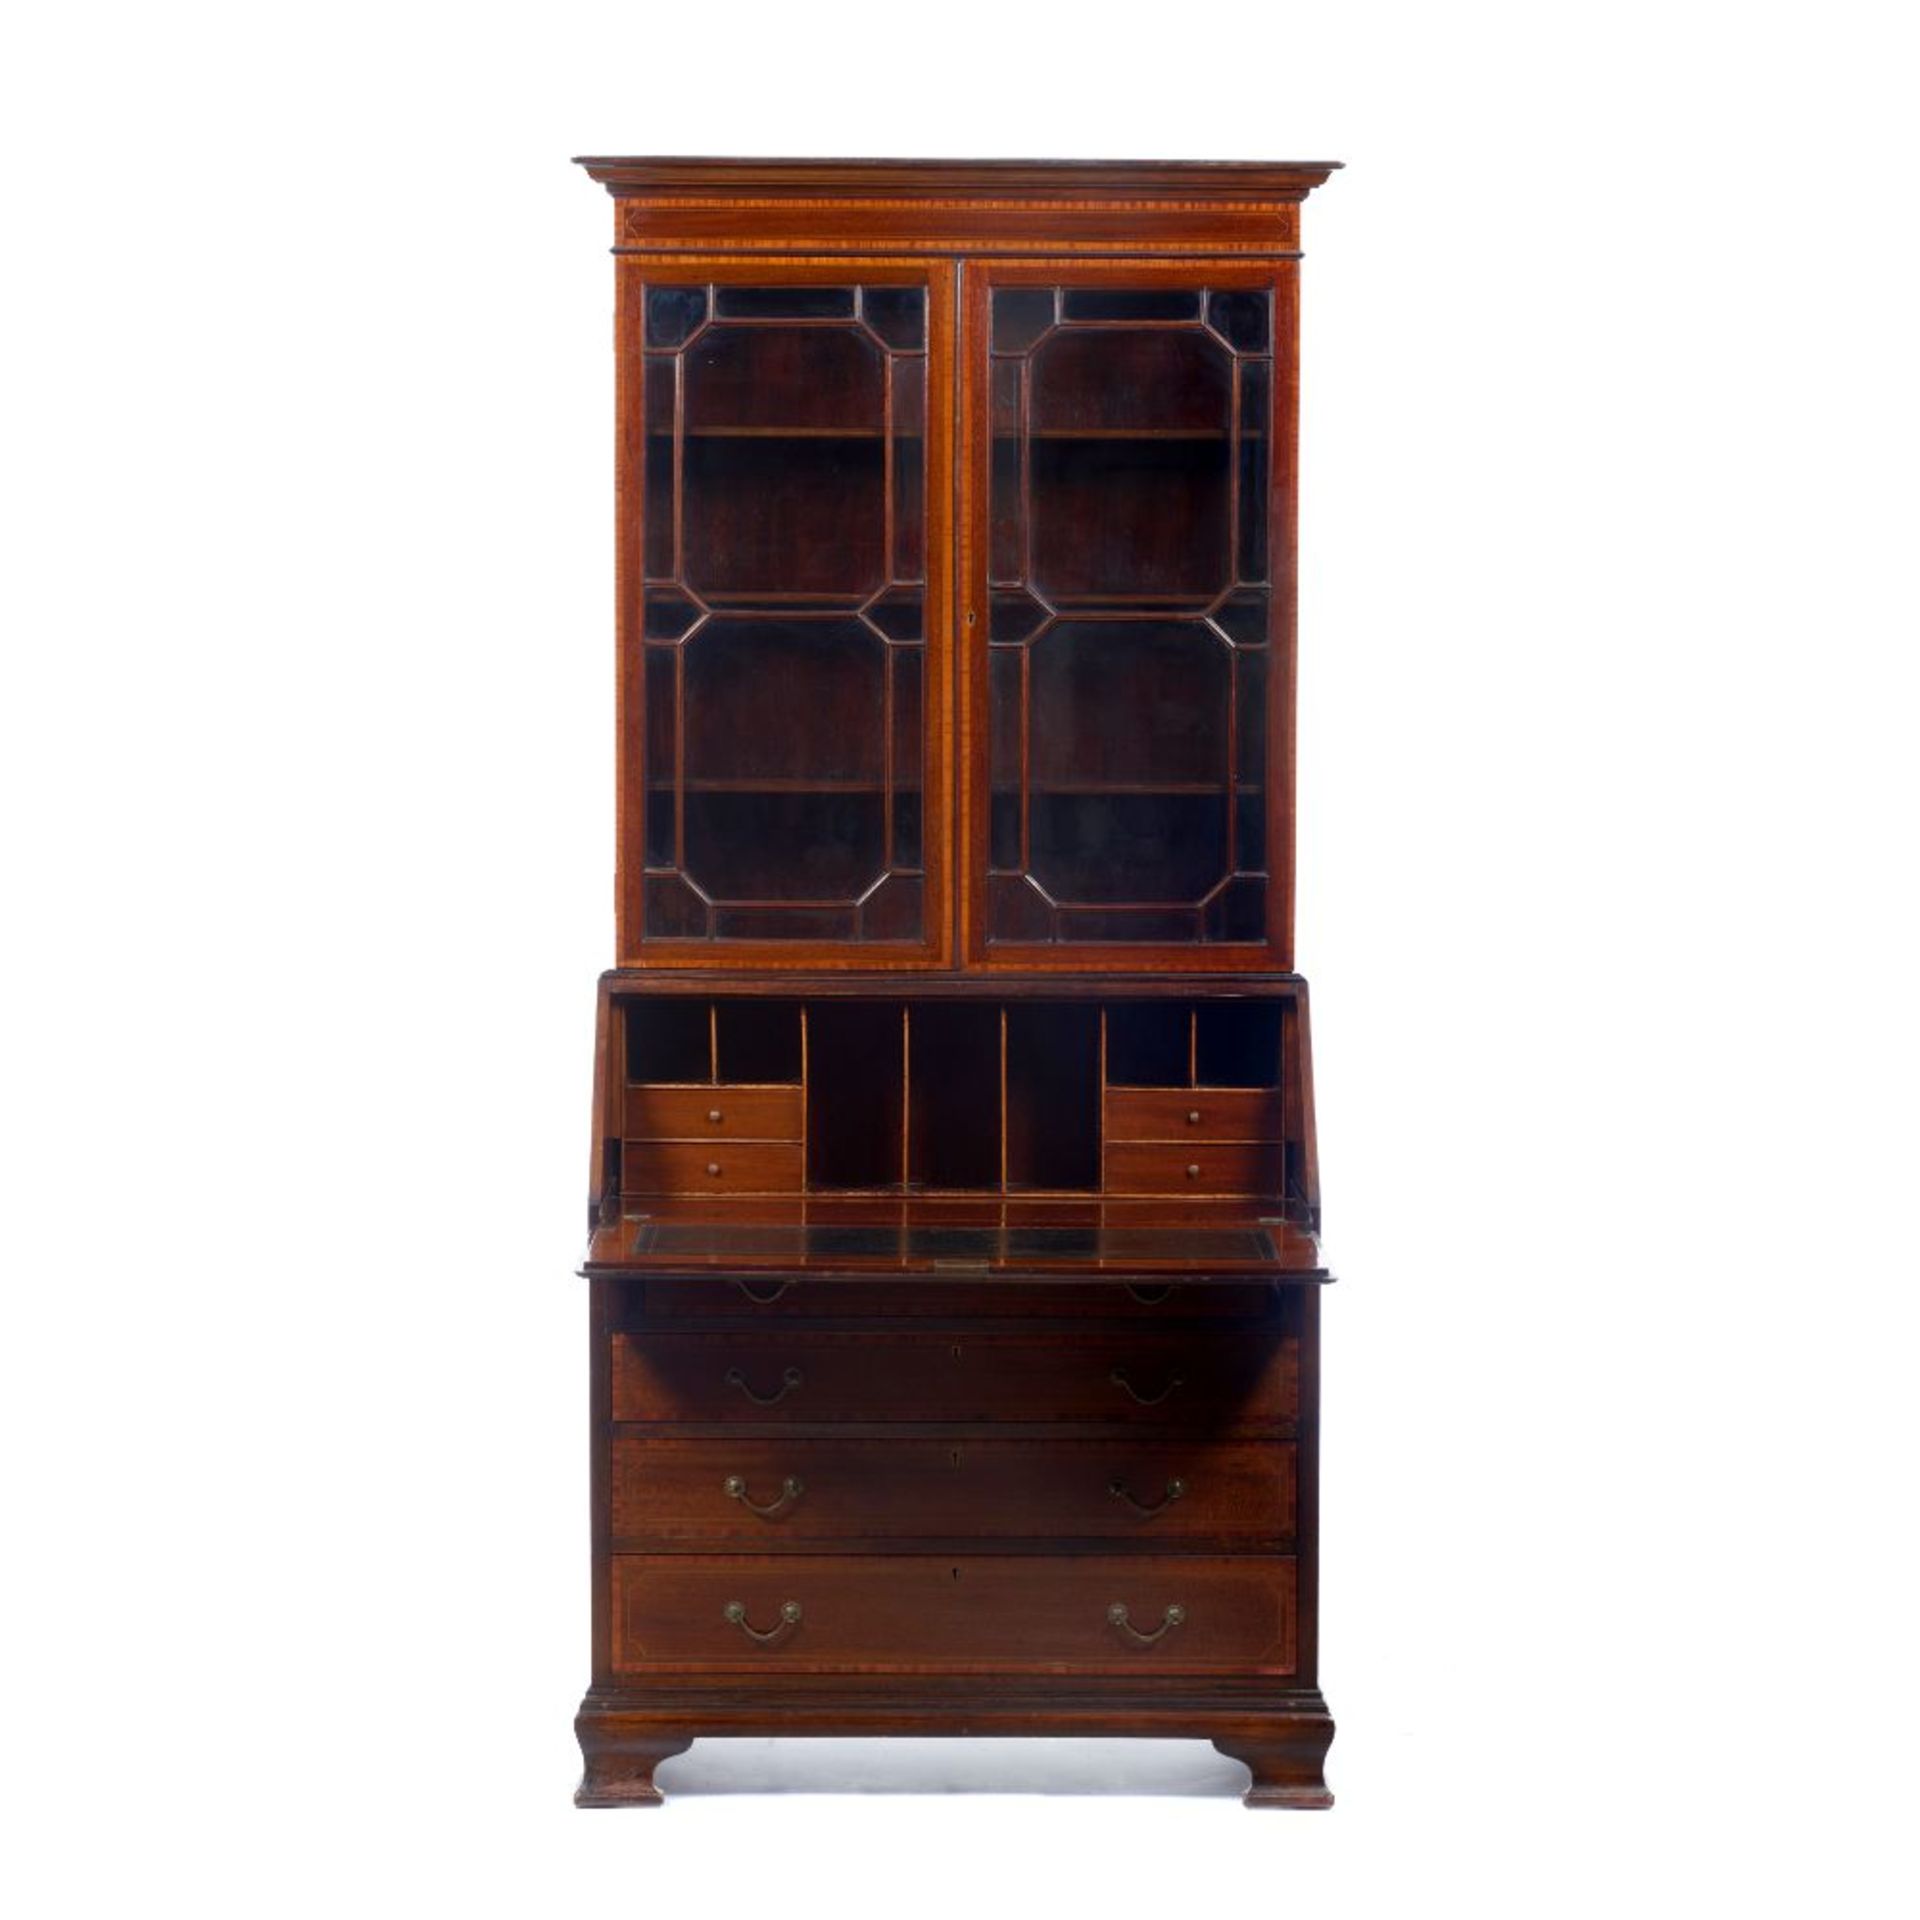 An Edwardian bureau bookcase, Mahogany and other woods, Two long drawers, two short drawers and fall - Image 2 of 2